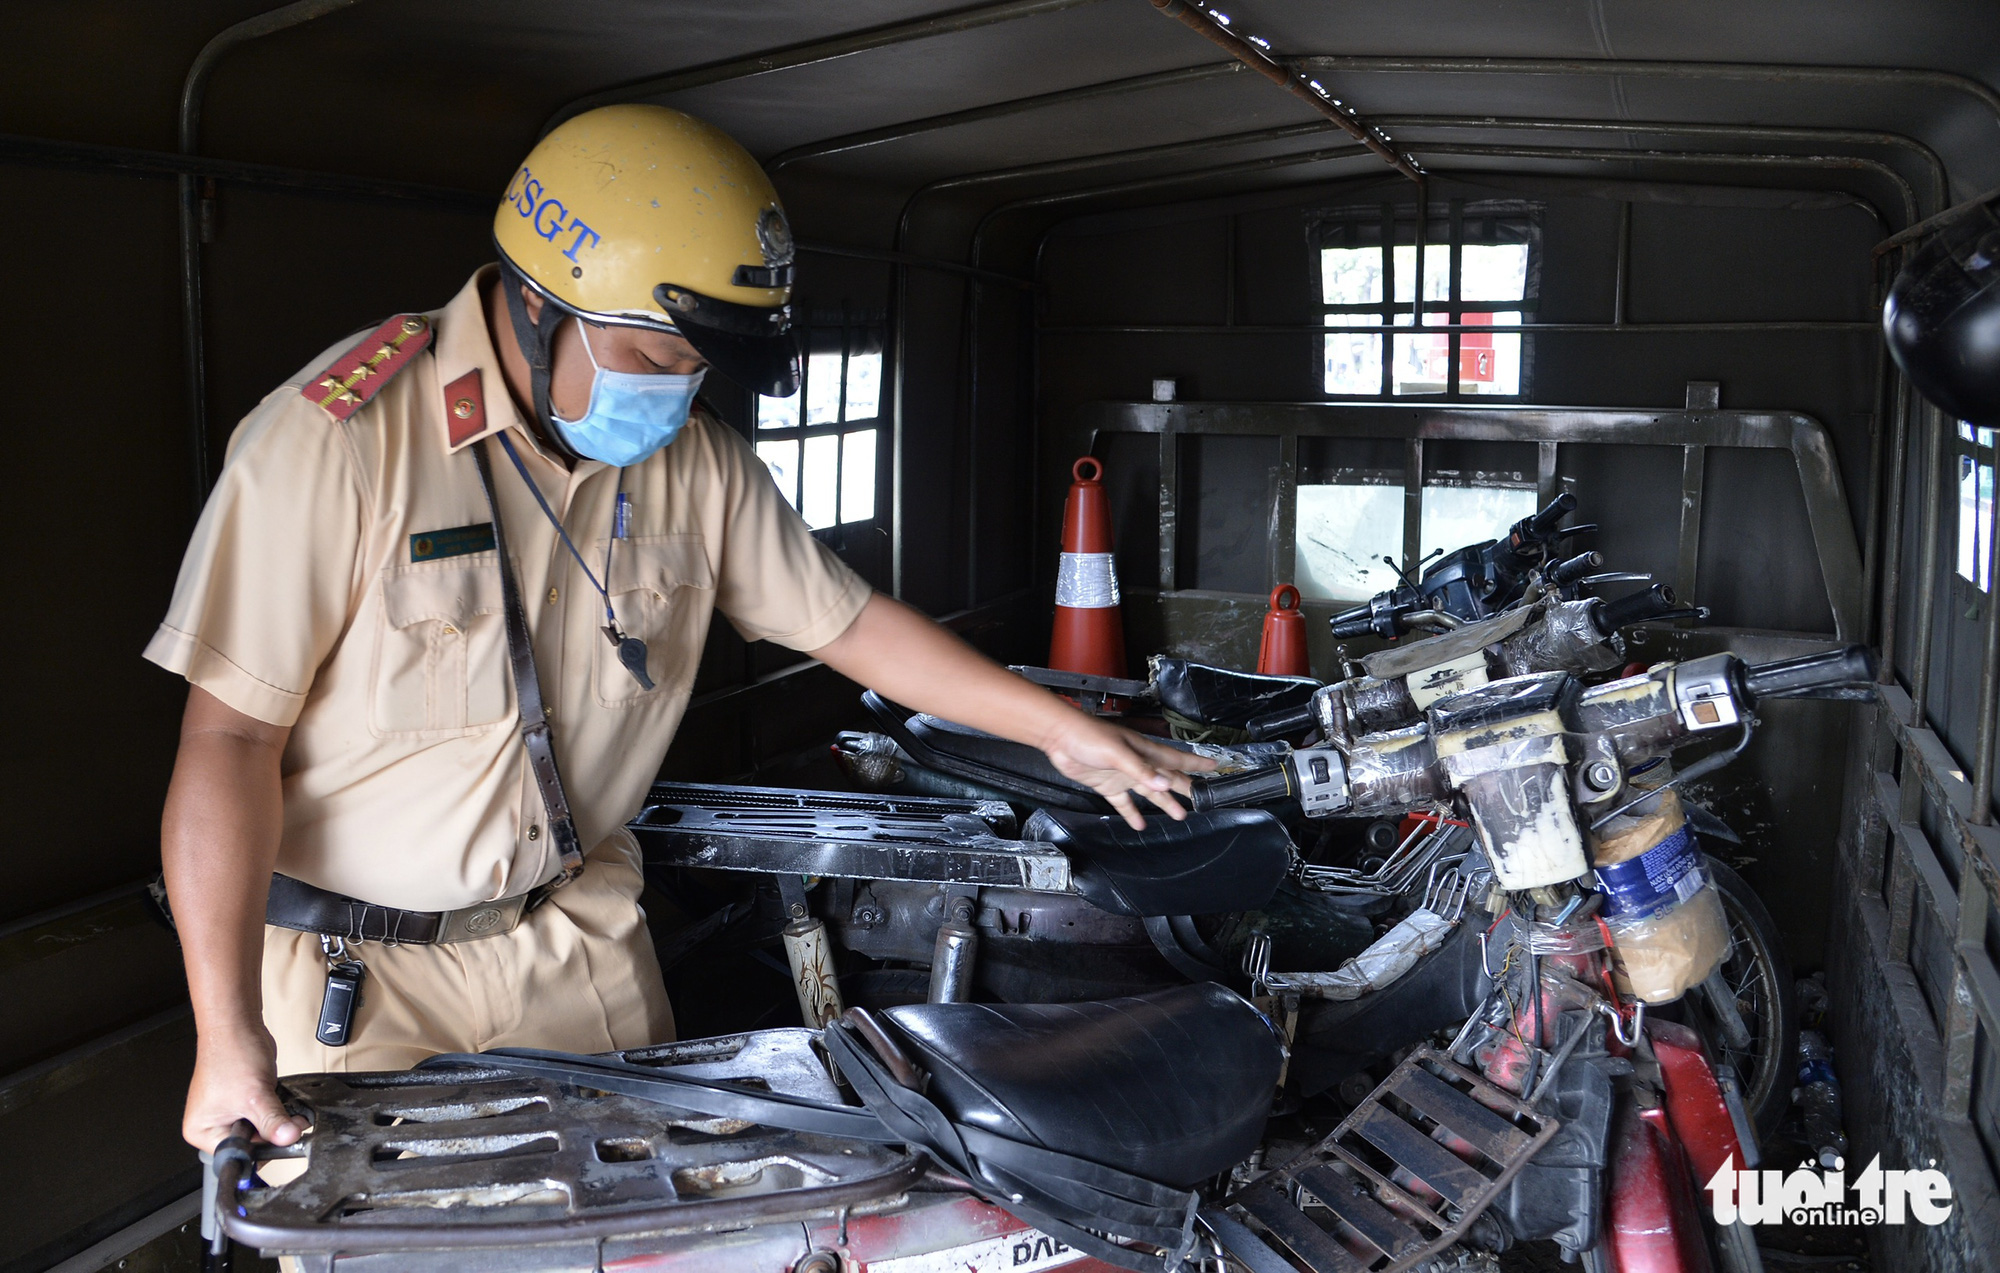 A traffic police officer seizes dilapidated motorcycles in Ho Chi Minh City, March 16, 2021. Photo: Tu Trung / Tuoi Tre